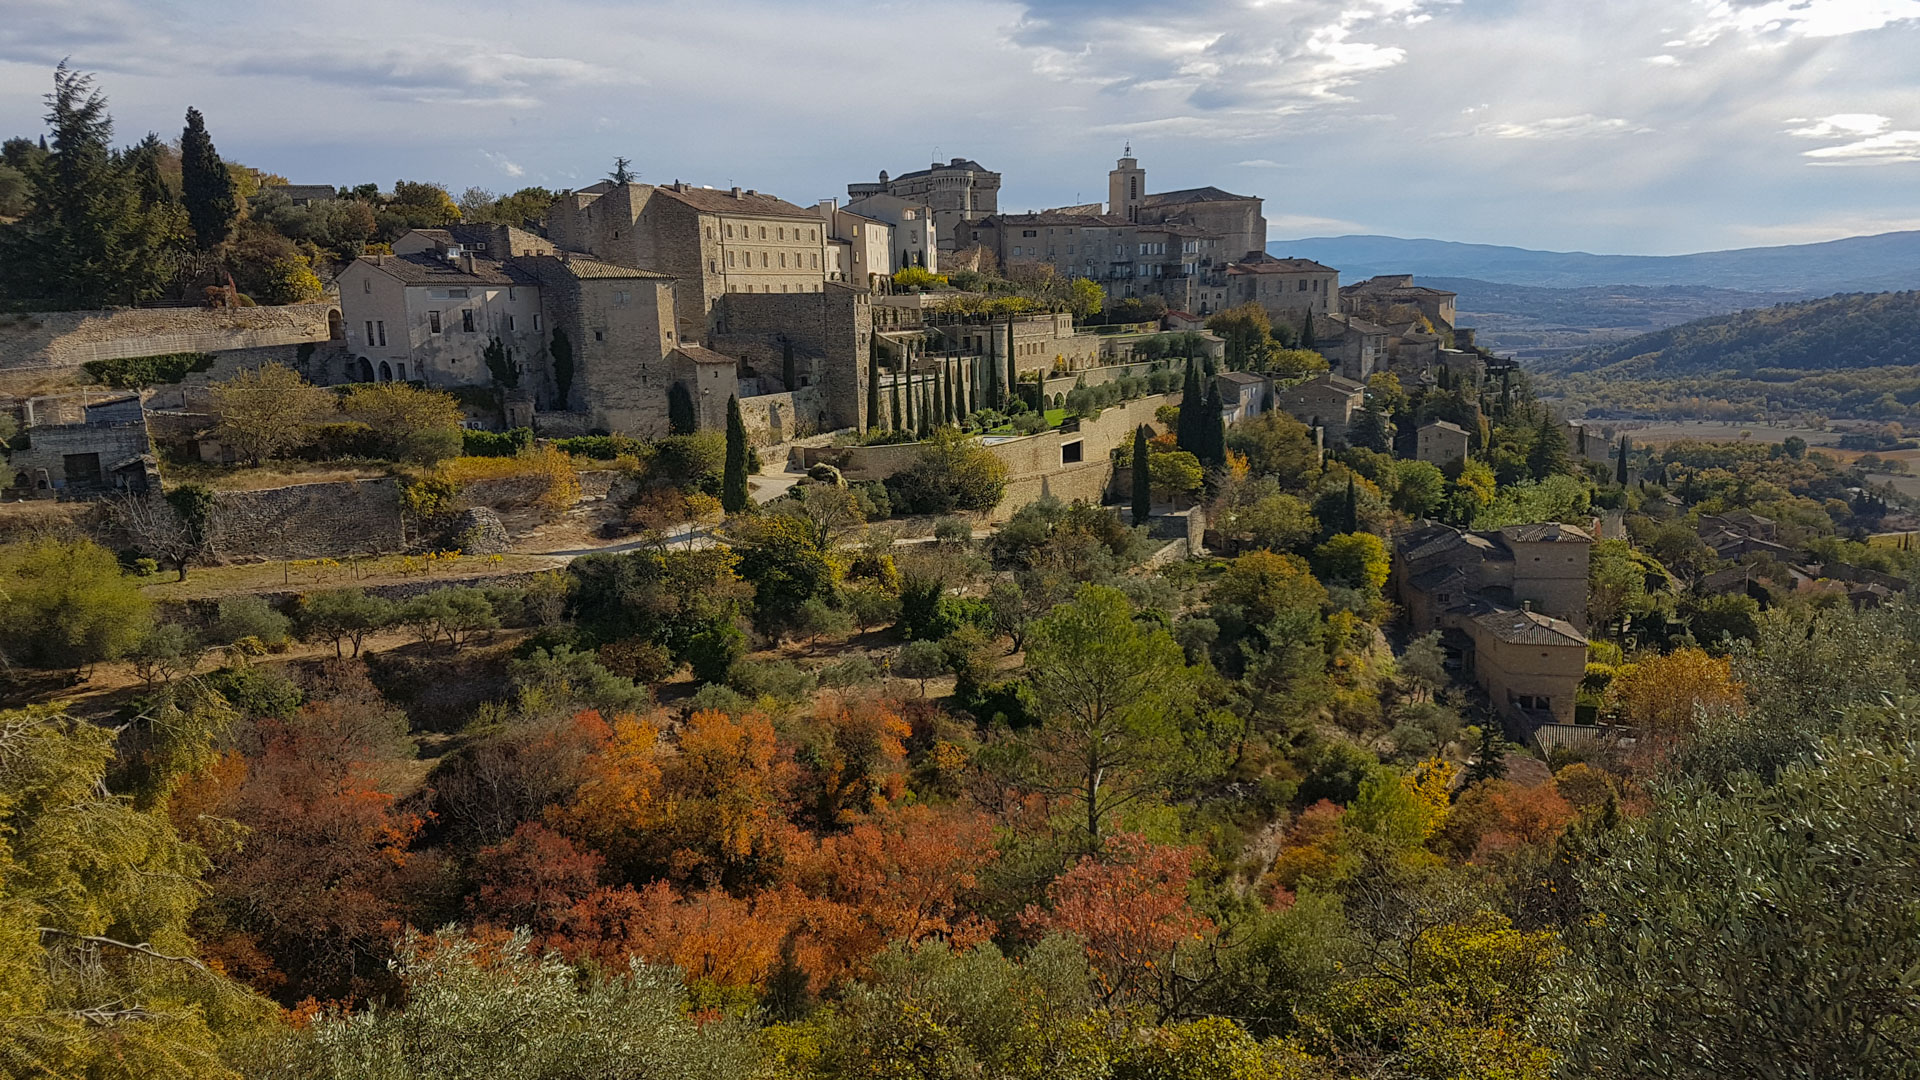 Gordes, one of the gems of the Luberon